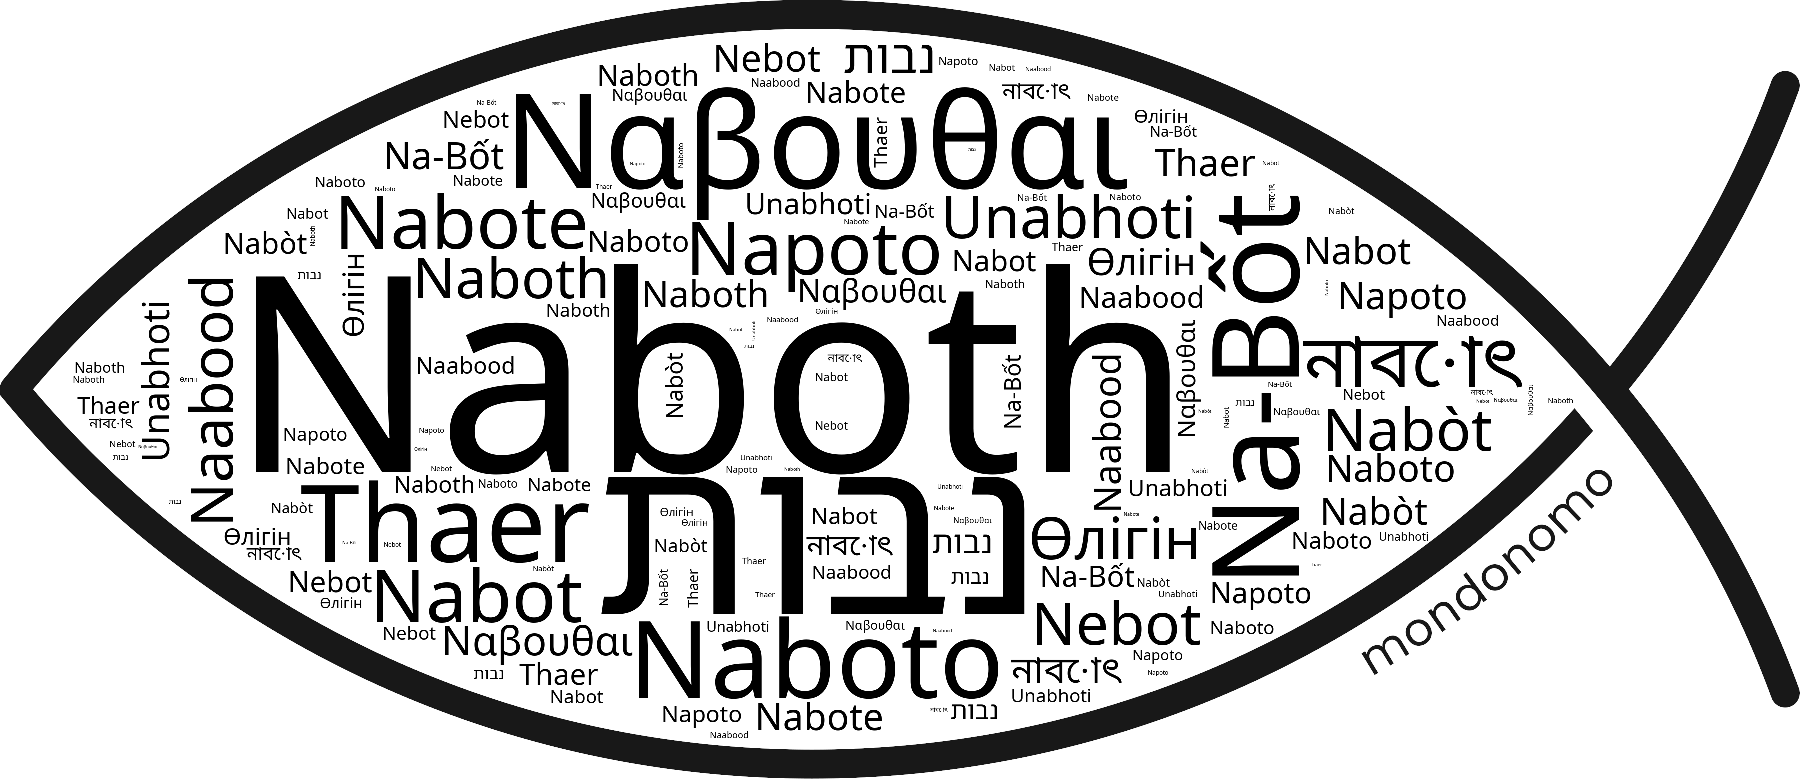 Name Naboth in the world's Bibles